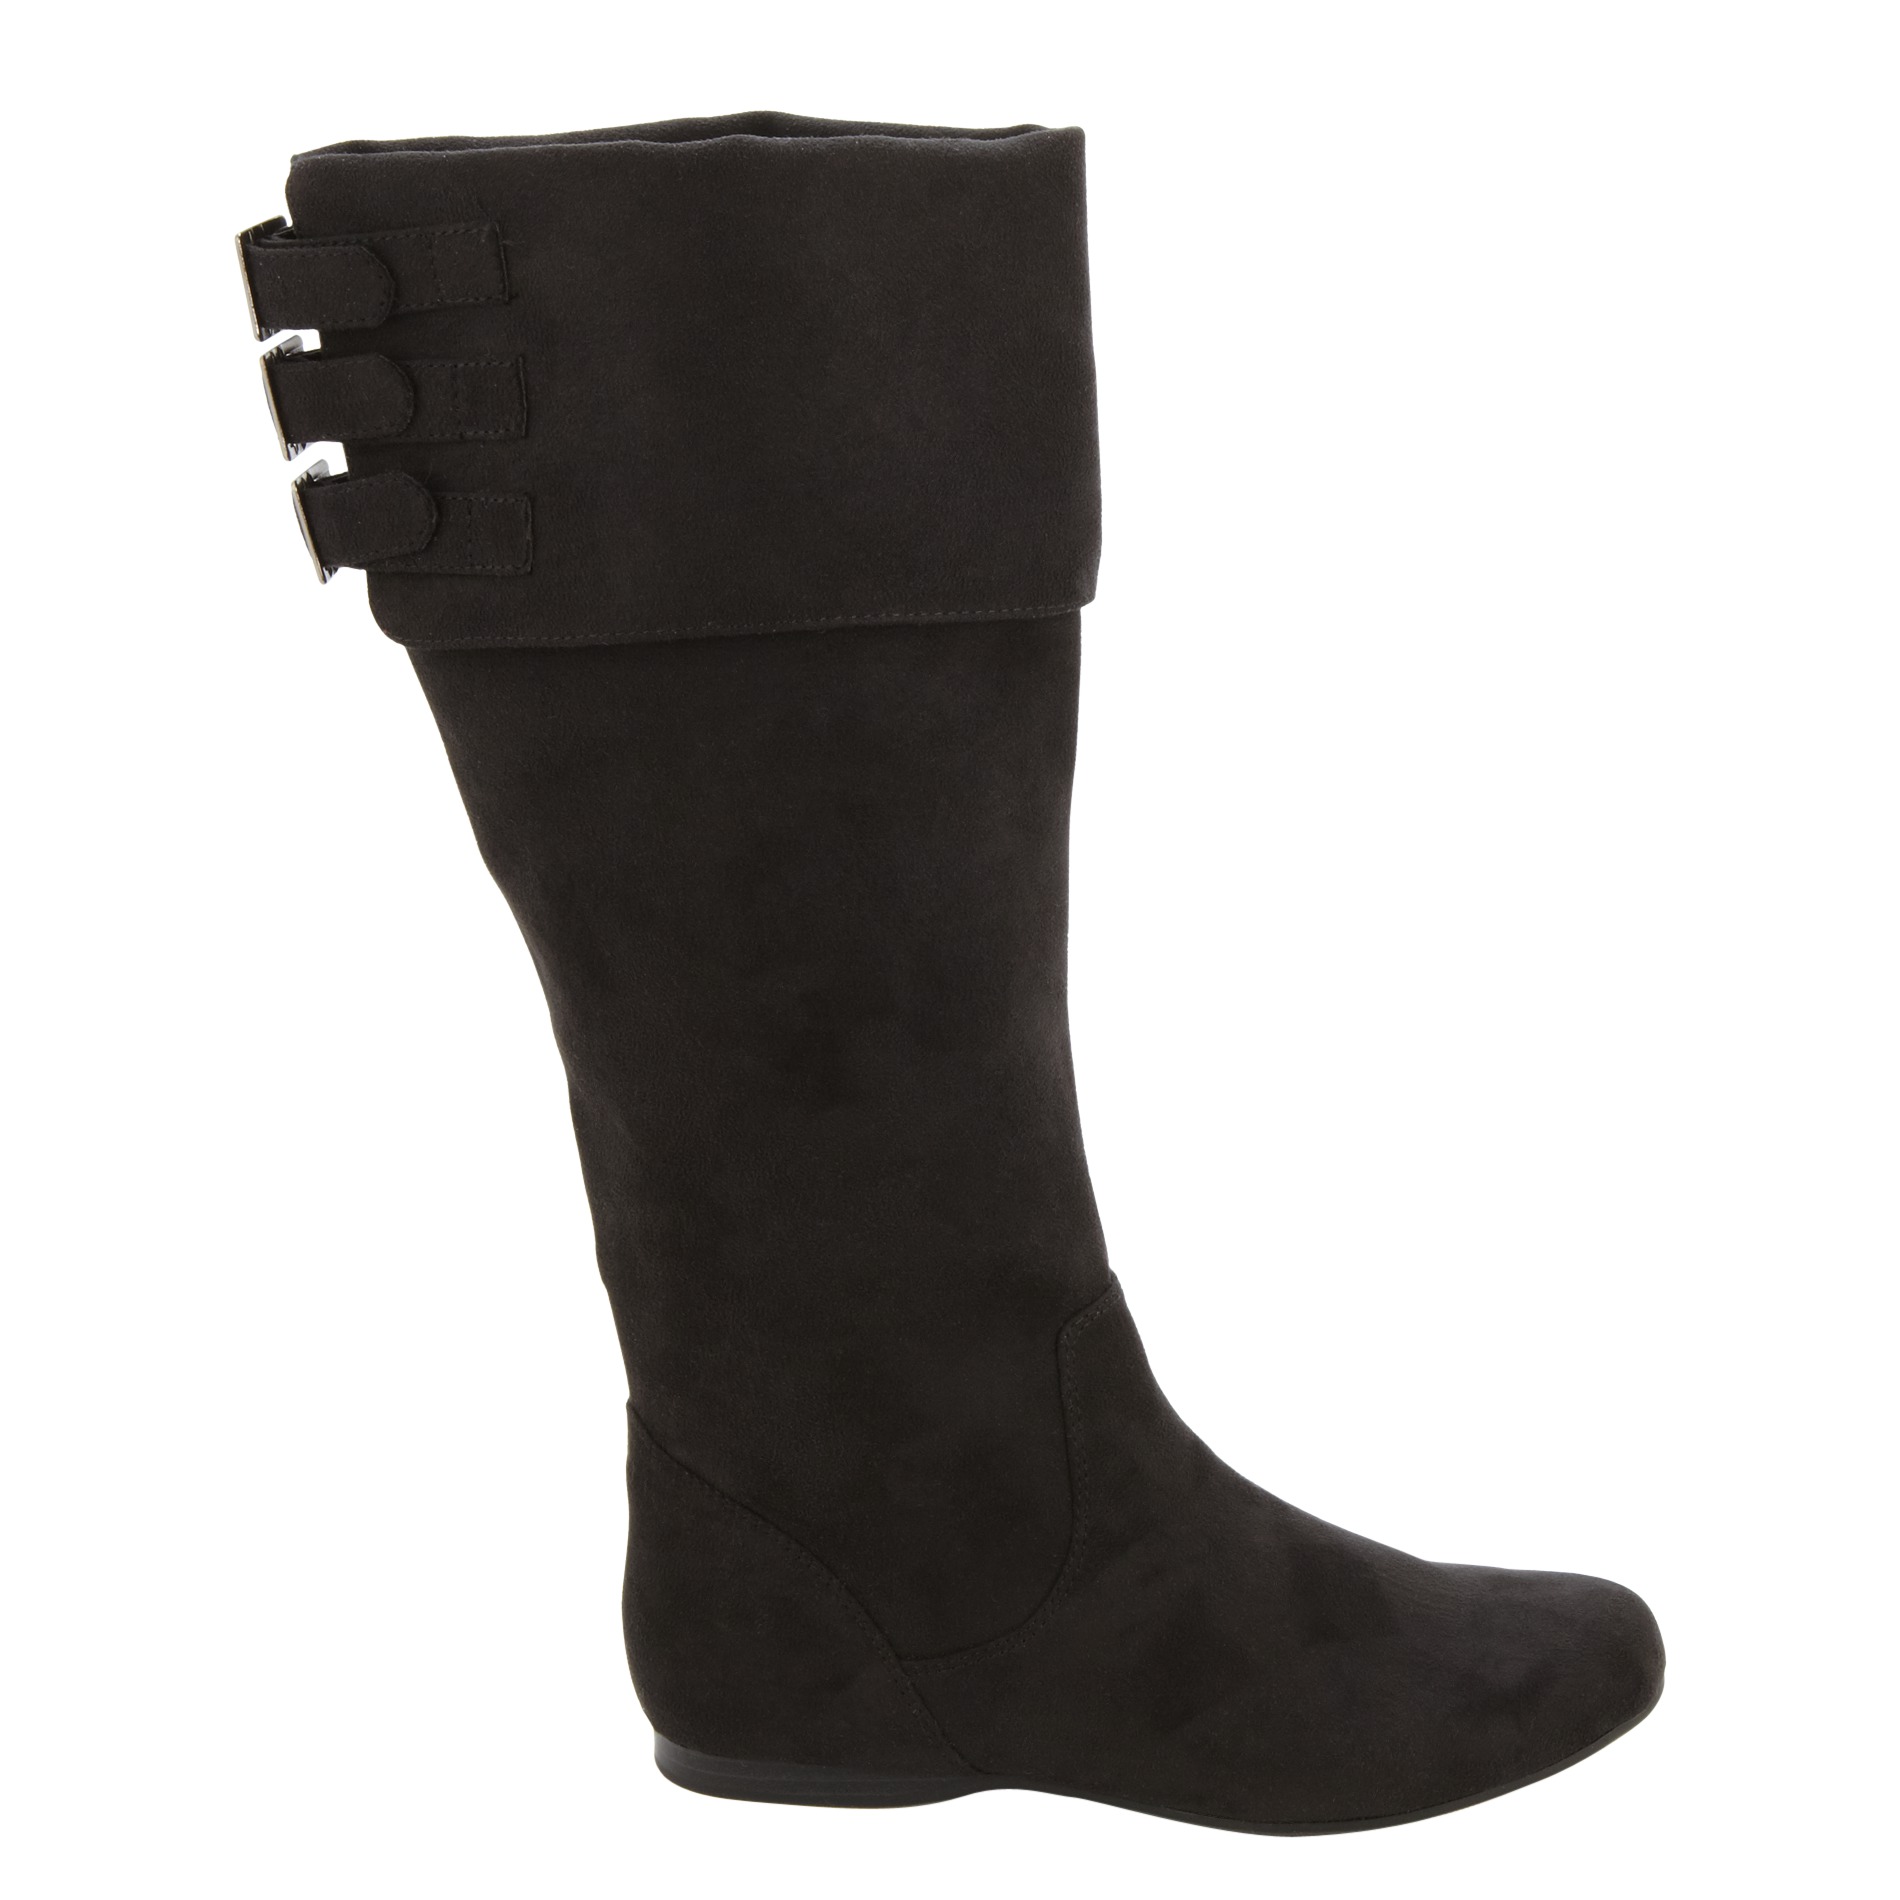 Route 66 Women's Tova Tall Scrunch Boot - Wide Avail - Black